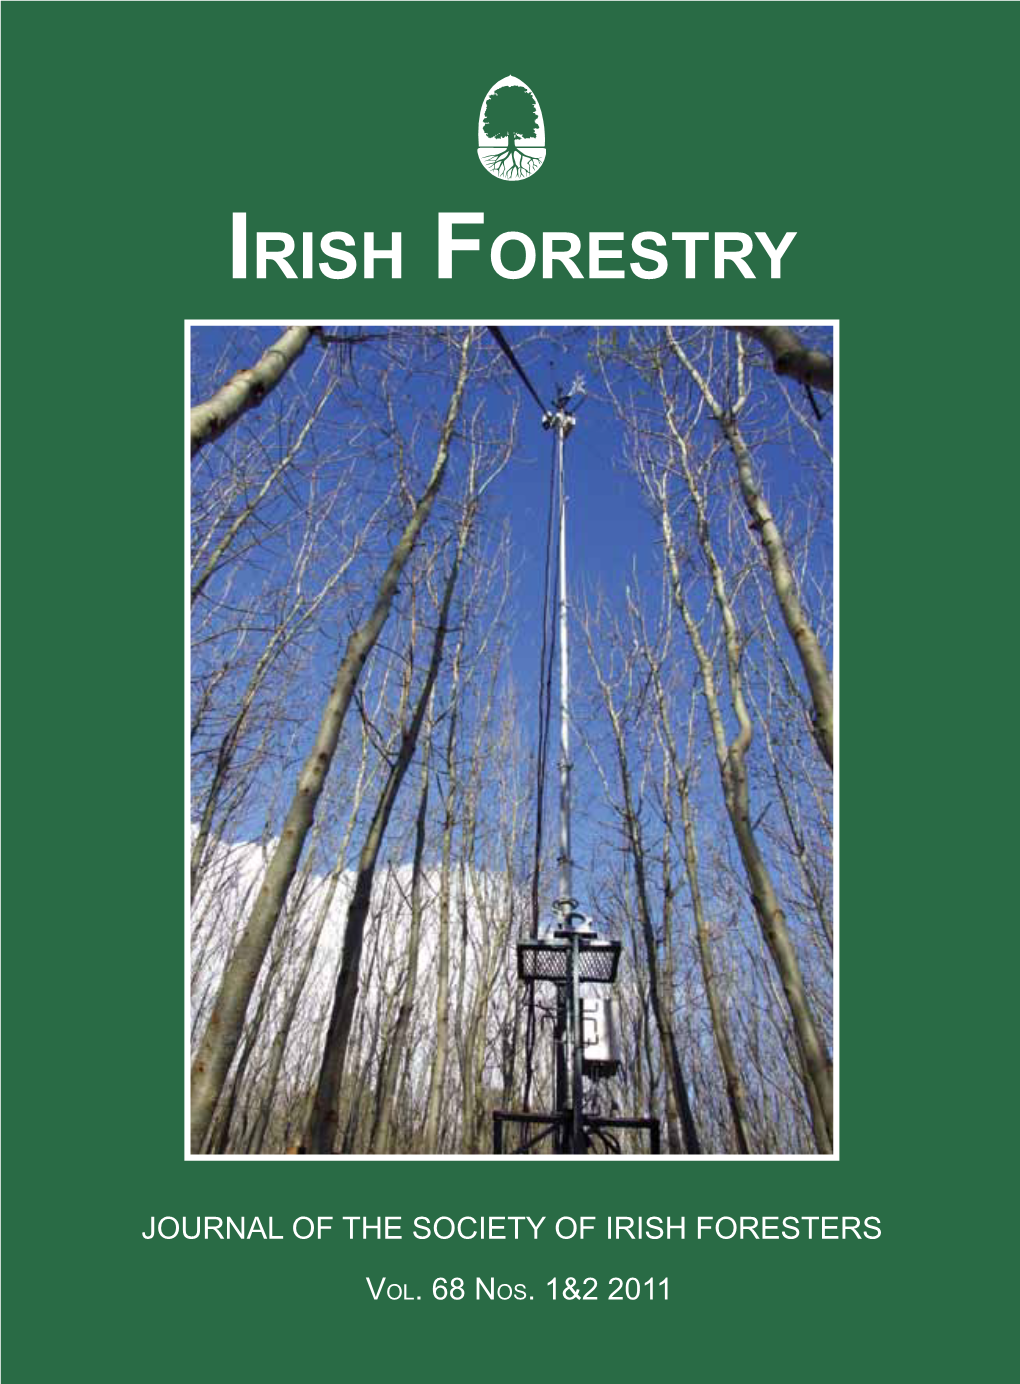 Irish Forestry -Journal of the Society of Irish Foresters